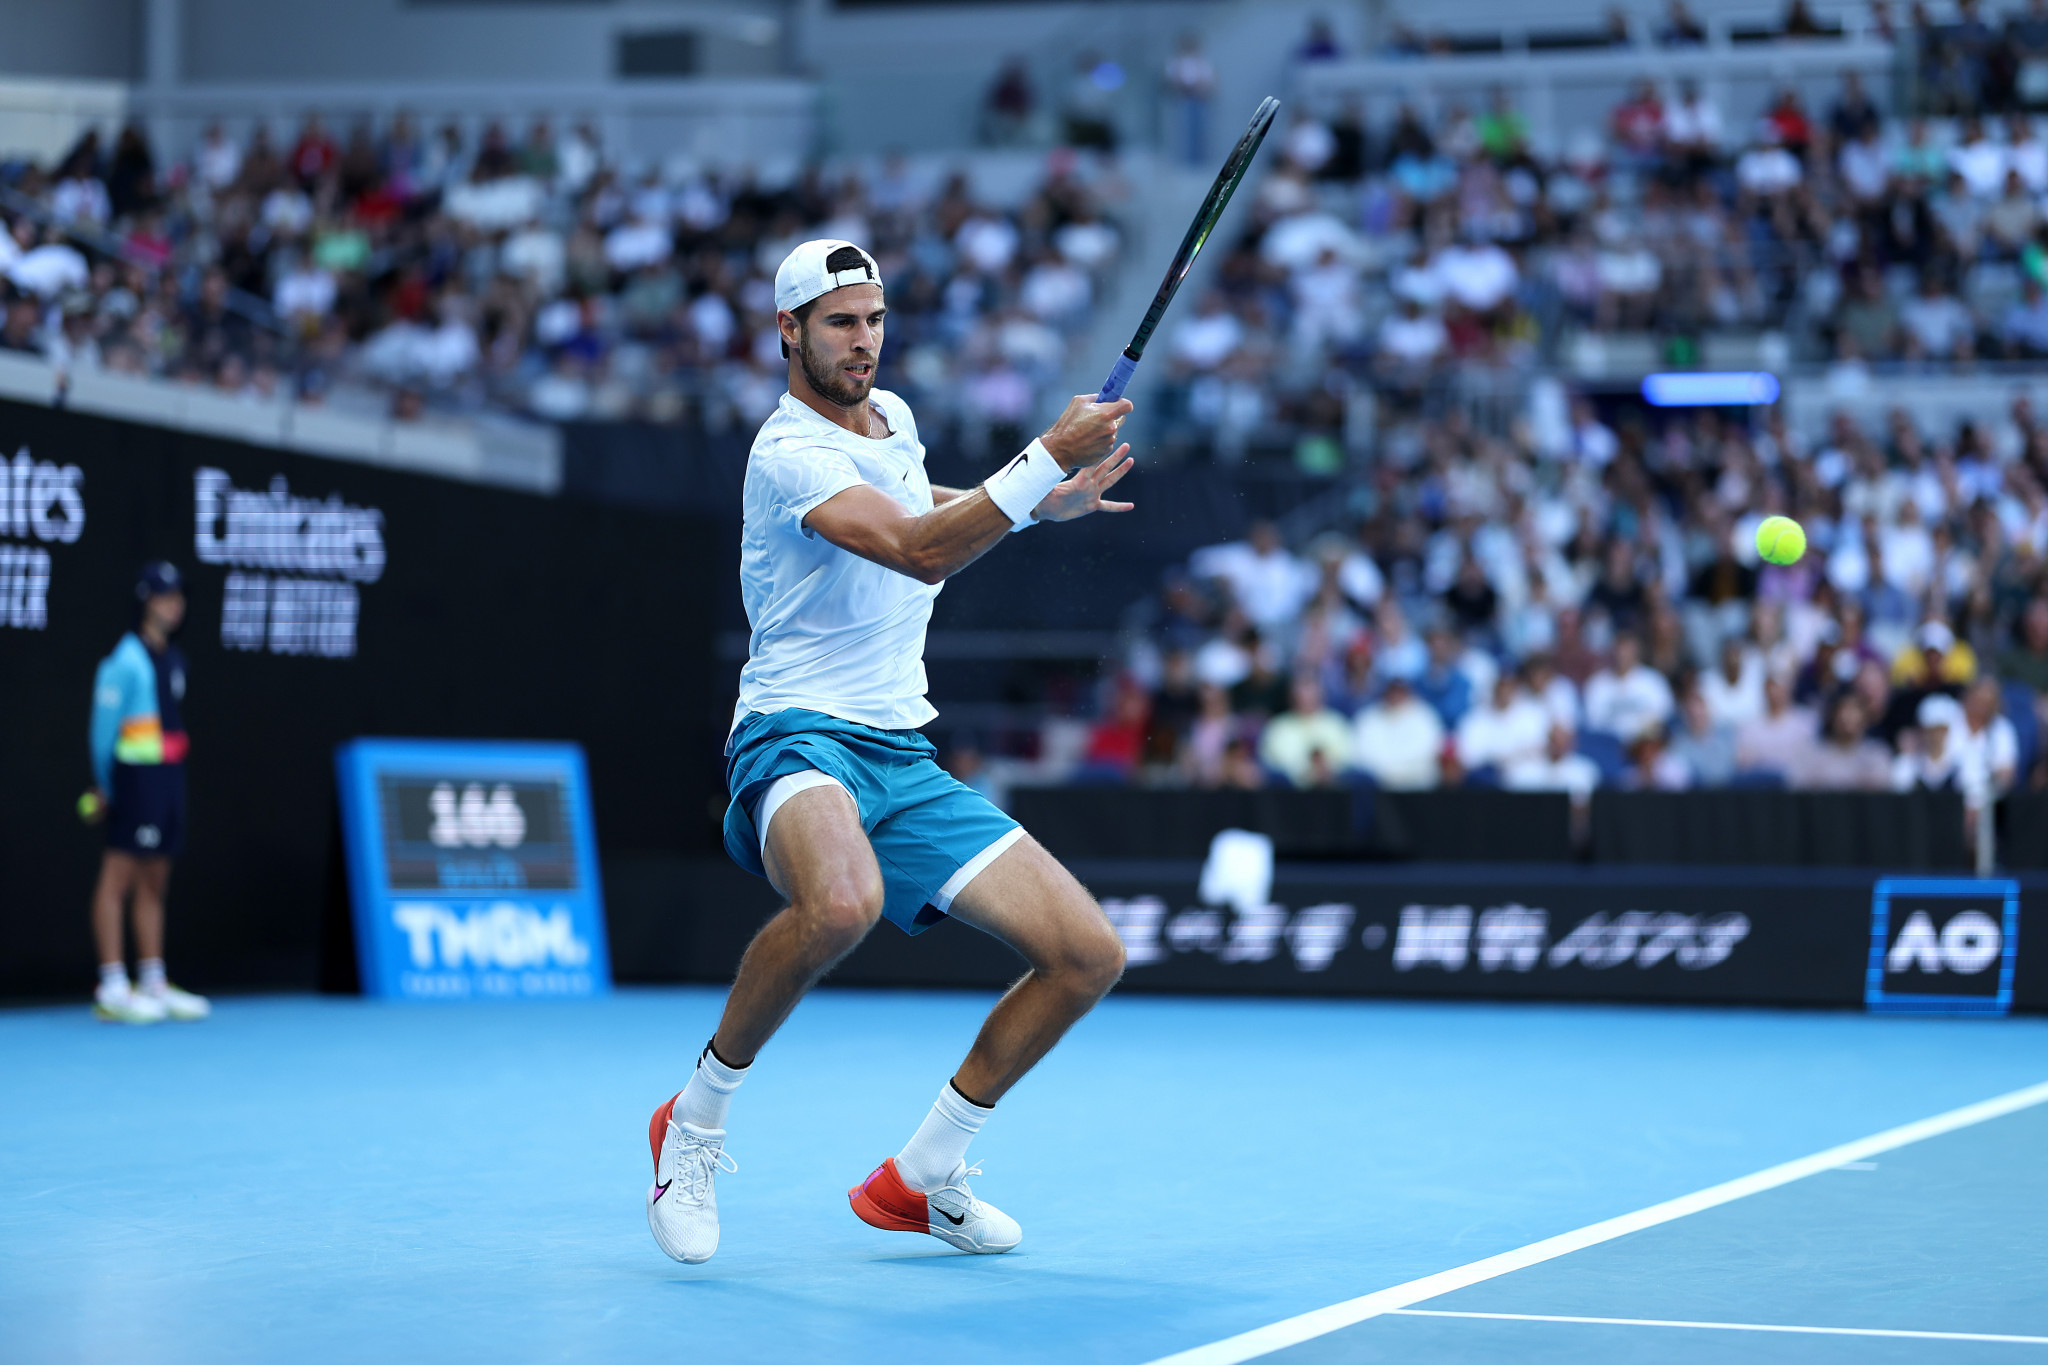 Olympic silver medallist Karen Khachanov, a Russian playing as a neutral, survived six set points in the fourth-set tiebreak to spring a surprise against American Frances Tiafoe ©Getty Images